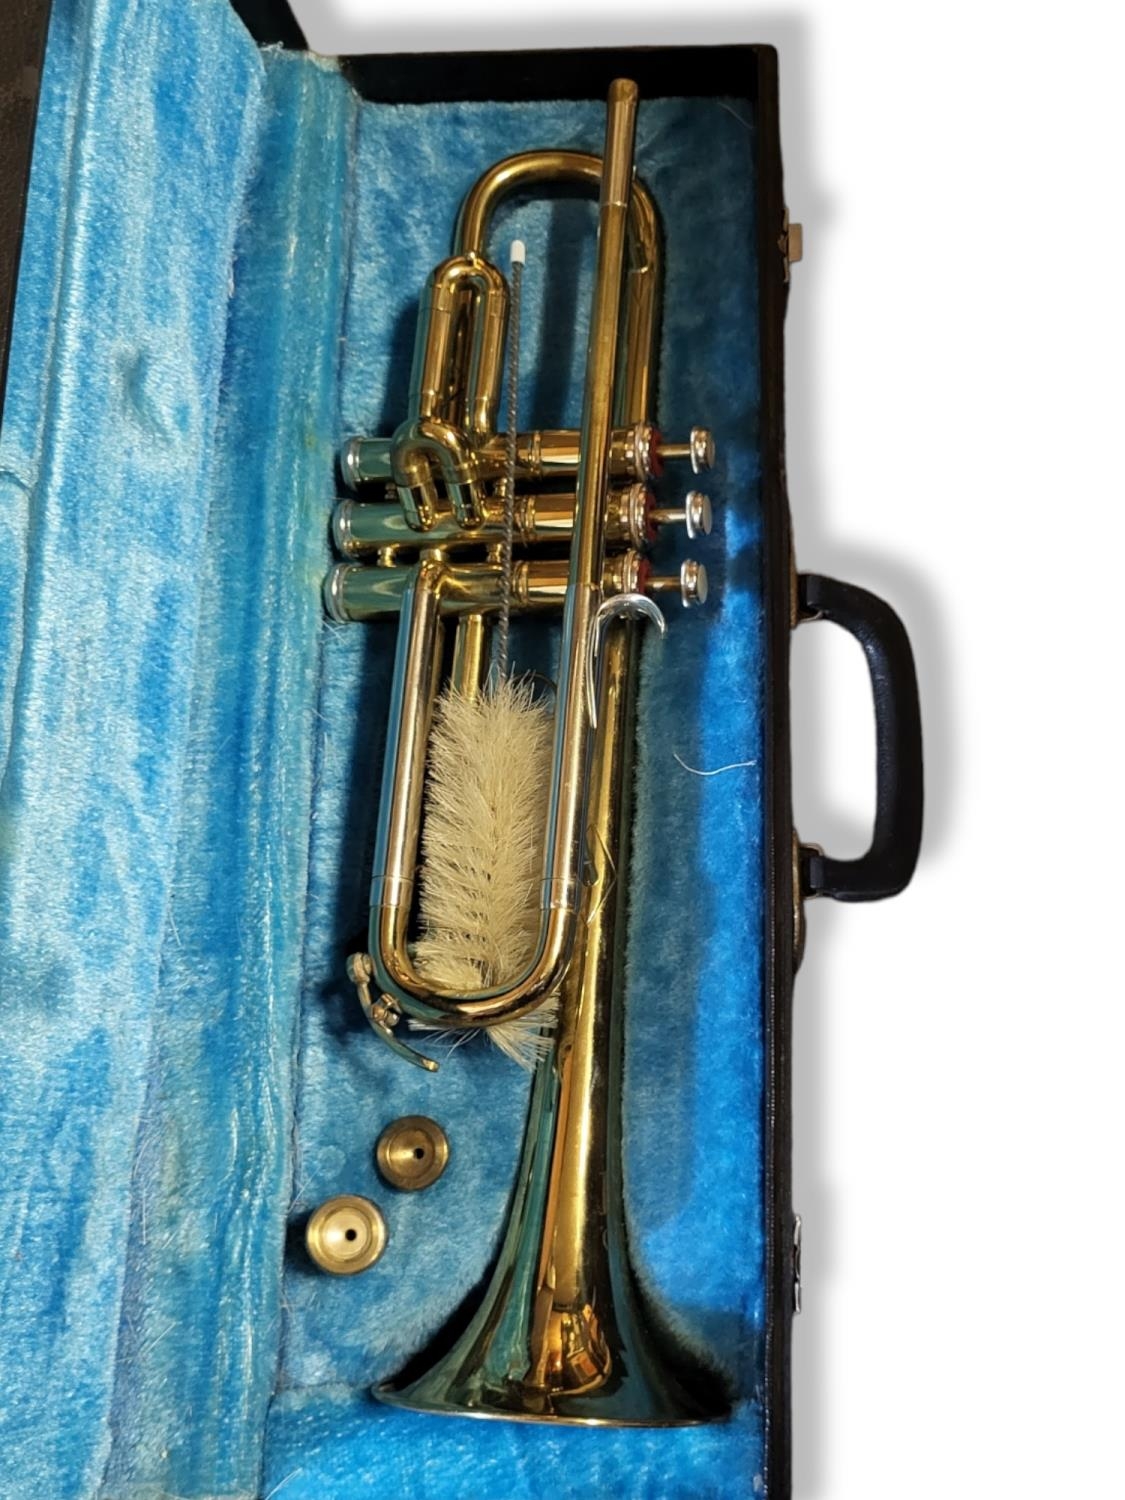 A B&M CHAMPION BRASS TRUMPET With two mouthpieces, in hard carry case. (case 55cm x 18cm x 12cm) - Image 3 of 4